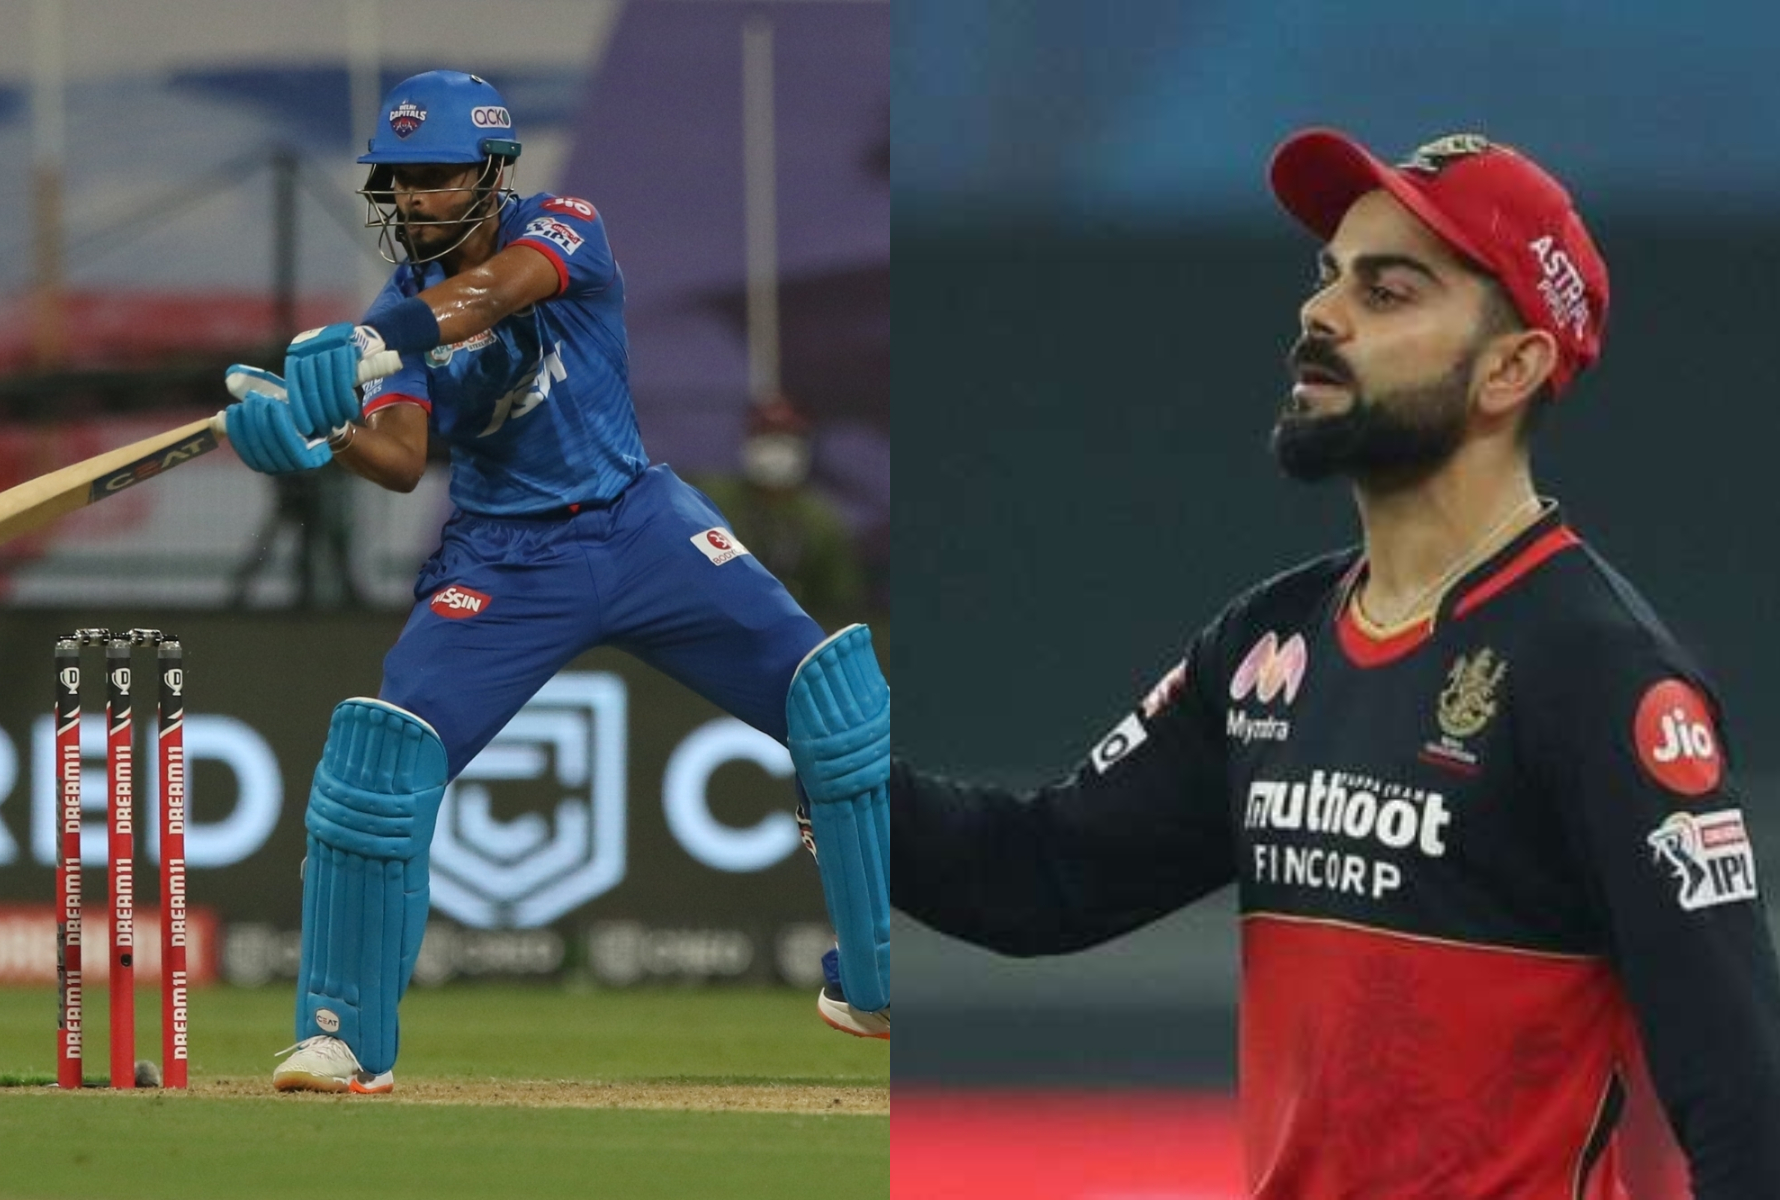 DC and RCB are no.1 and 2 respectively on IPL 2020 points table currently